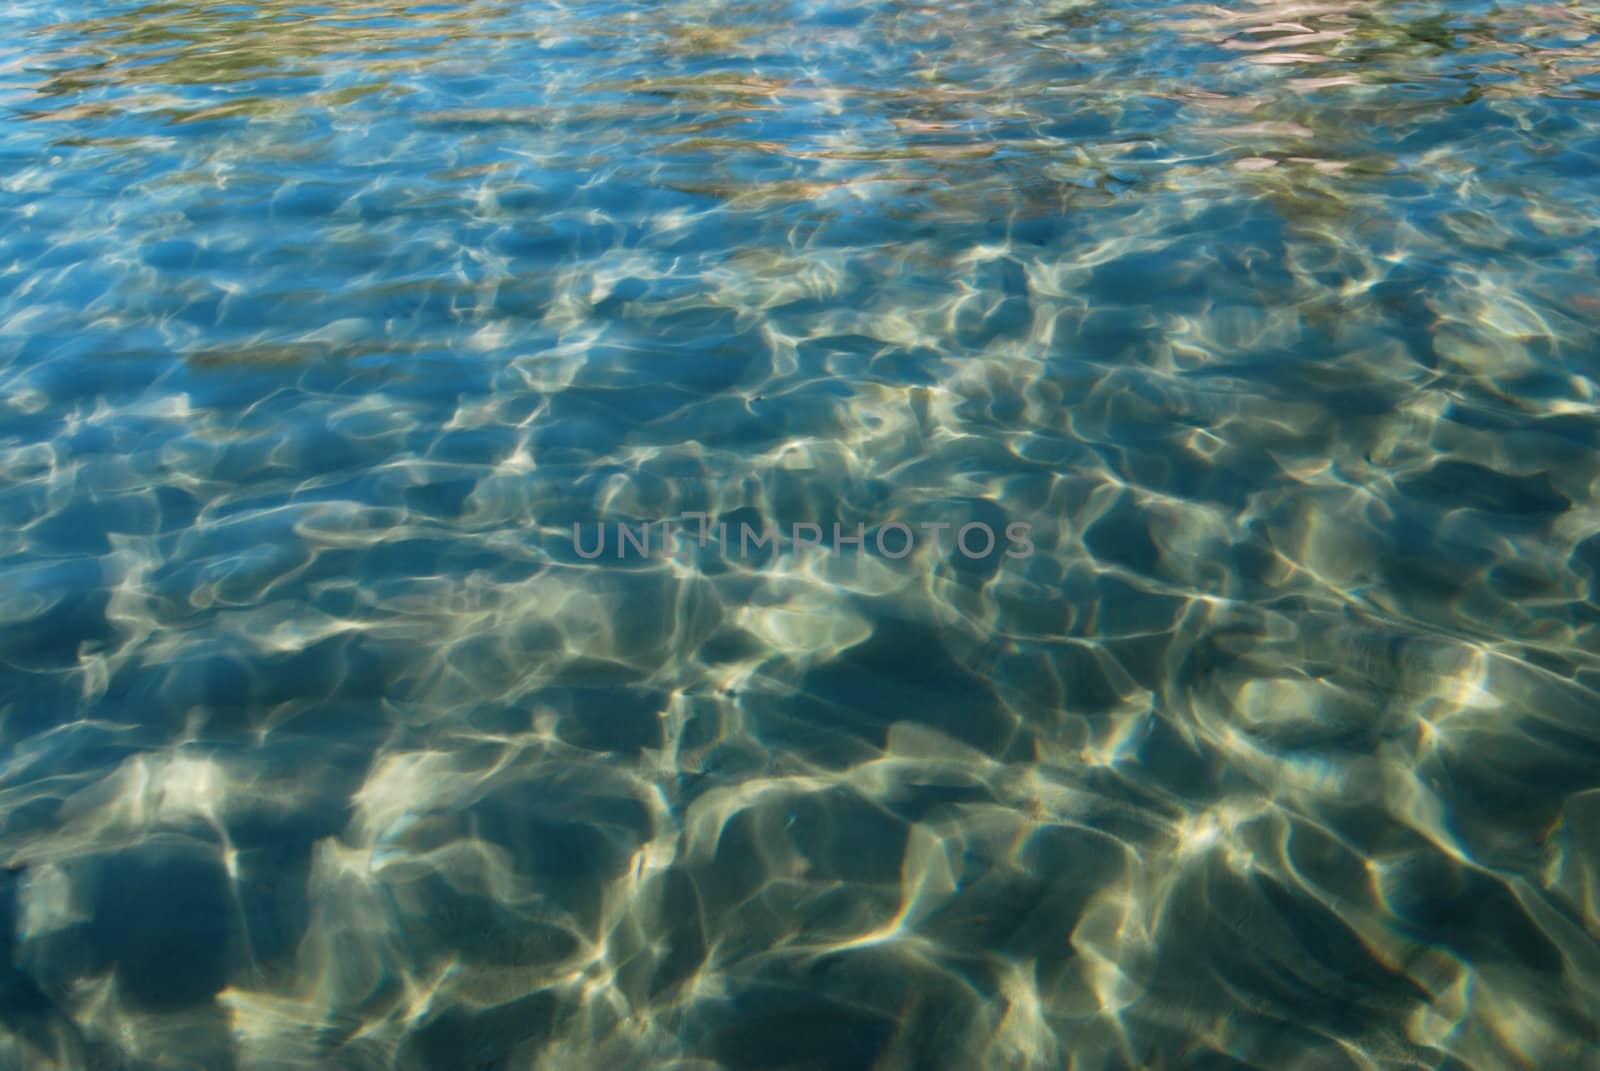 Water surface of a sea with white sand ground - good for background